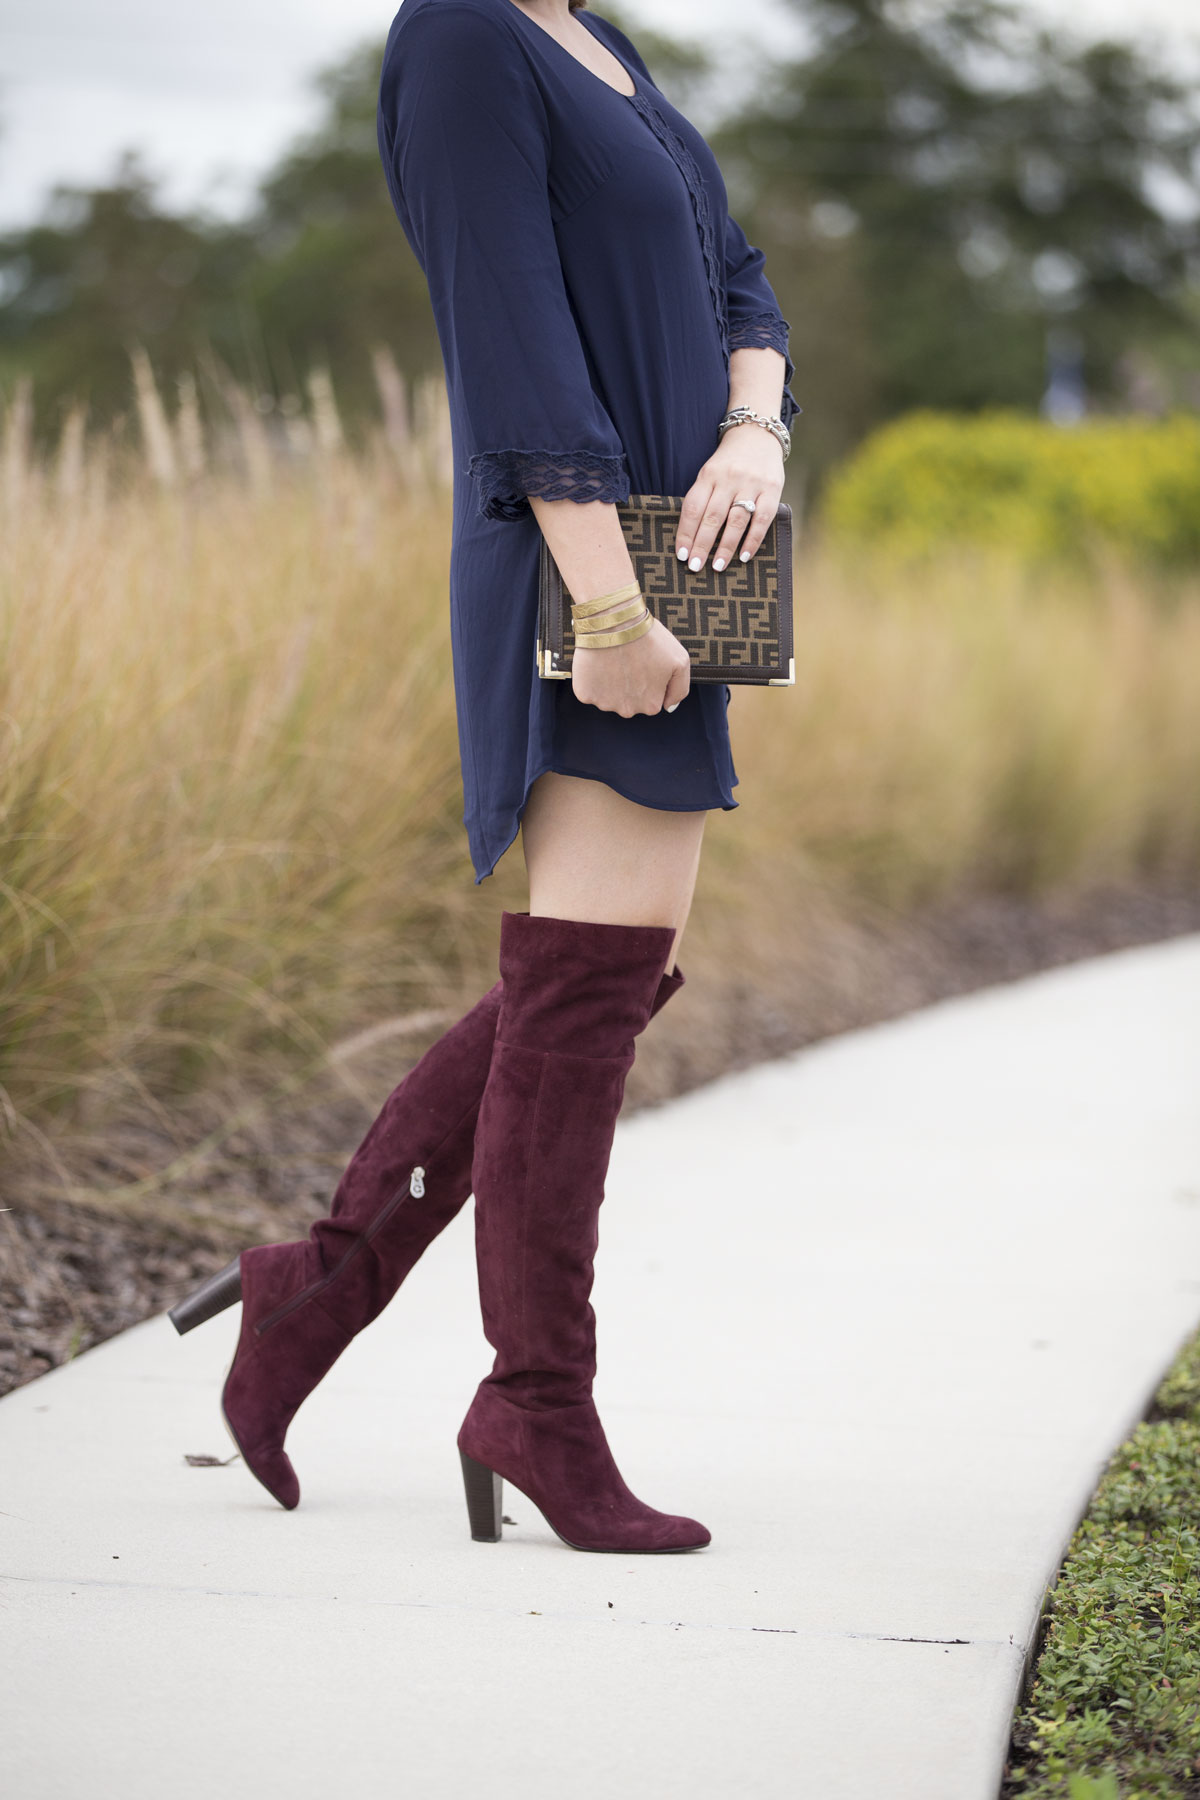 Blue dress with over the knee boots